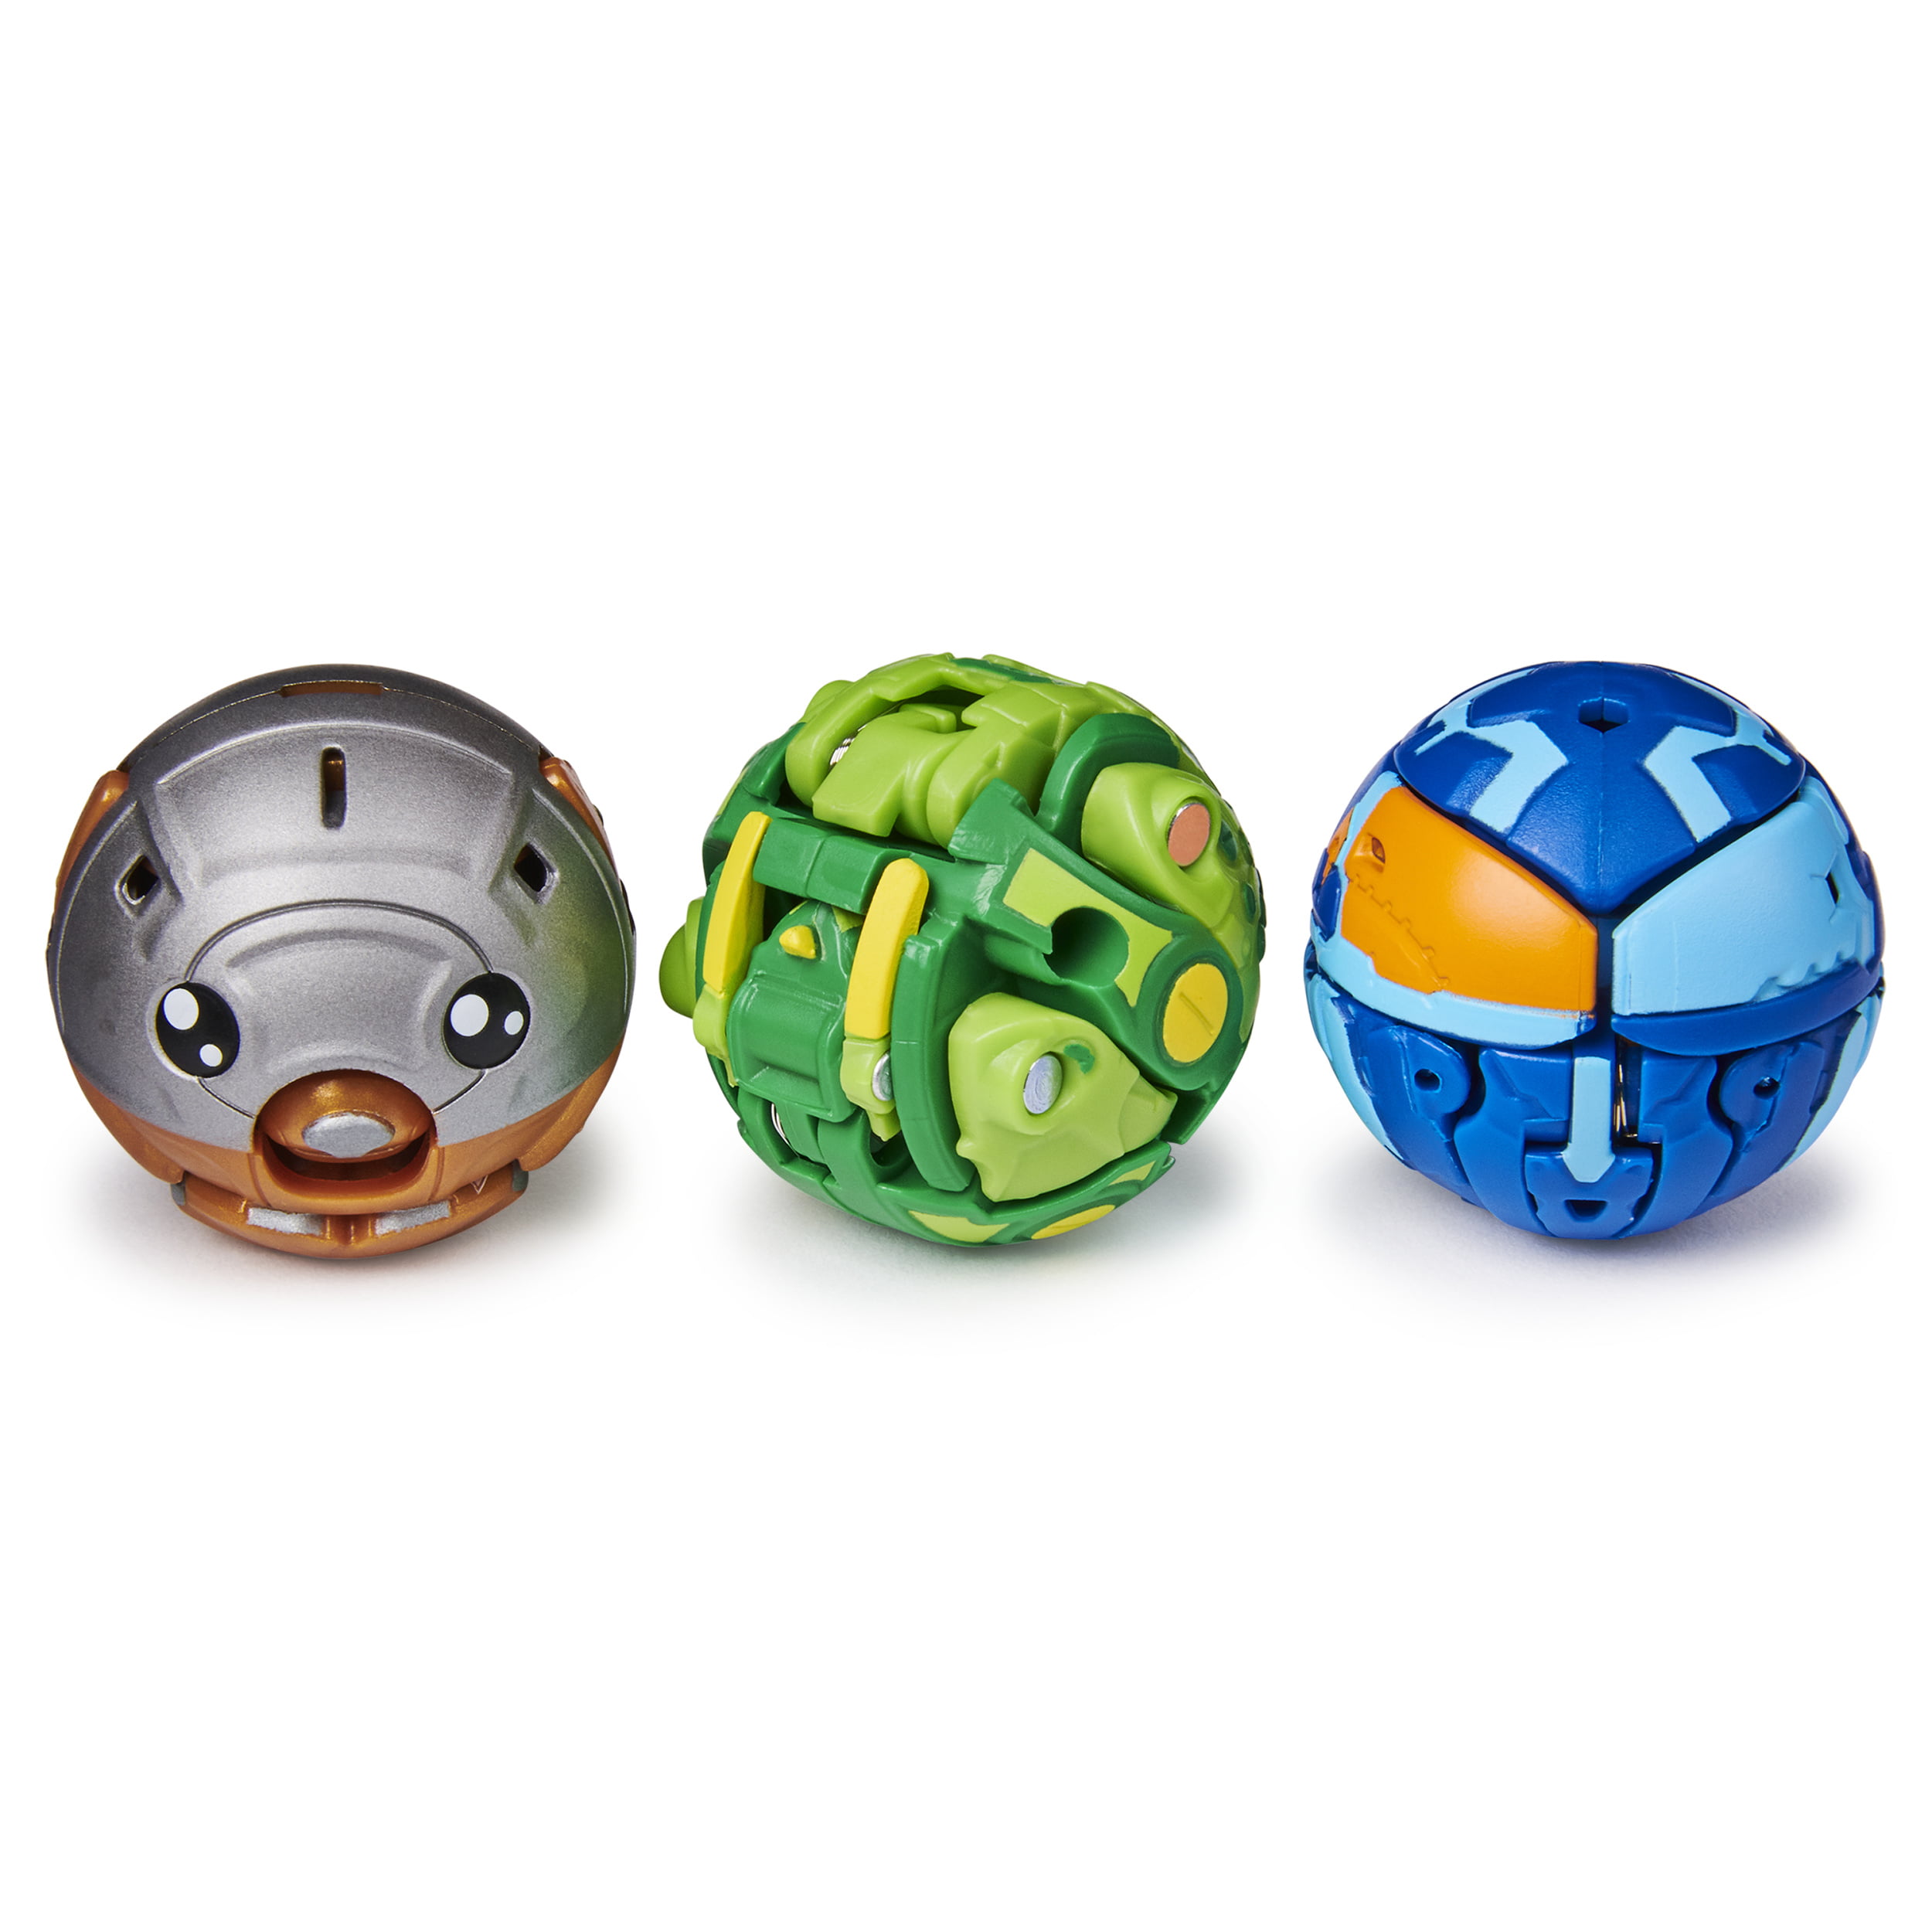 Bakugan 3.0 Starter Pack – 2 Balls, 1 Special Attack Ball, 1 Battle Ring, 1  Launcher Card and 9 Cards Collection – Children's Toy Age 6+ – Random